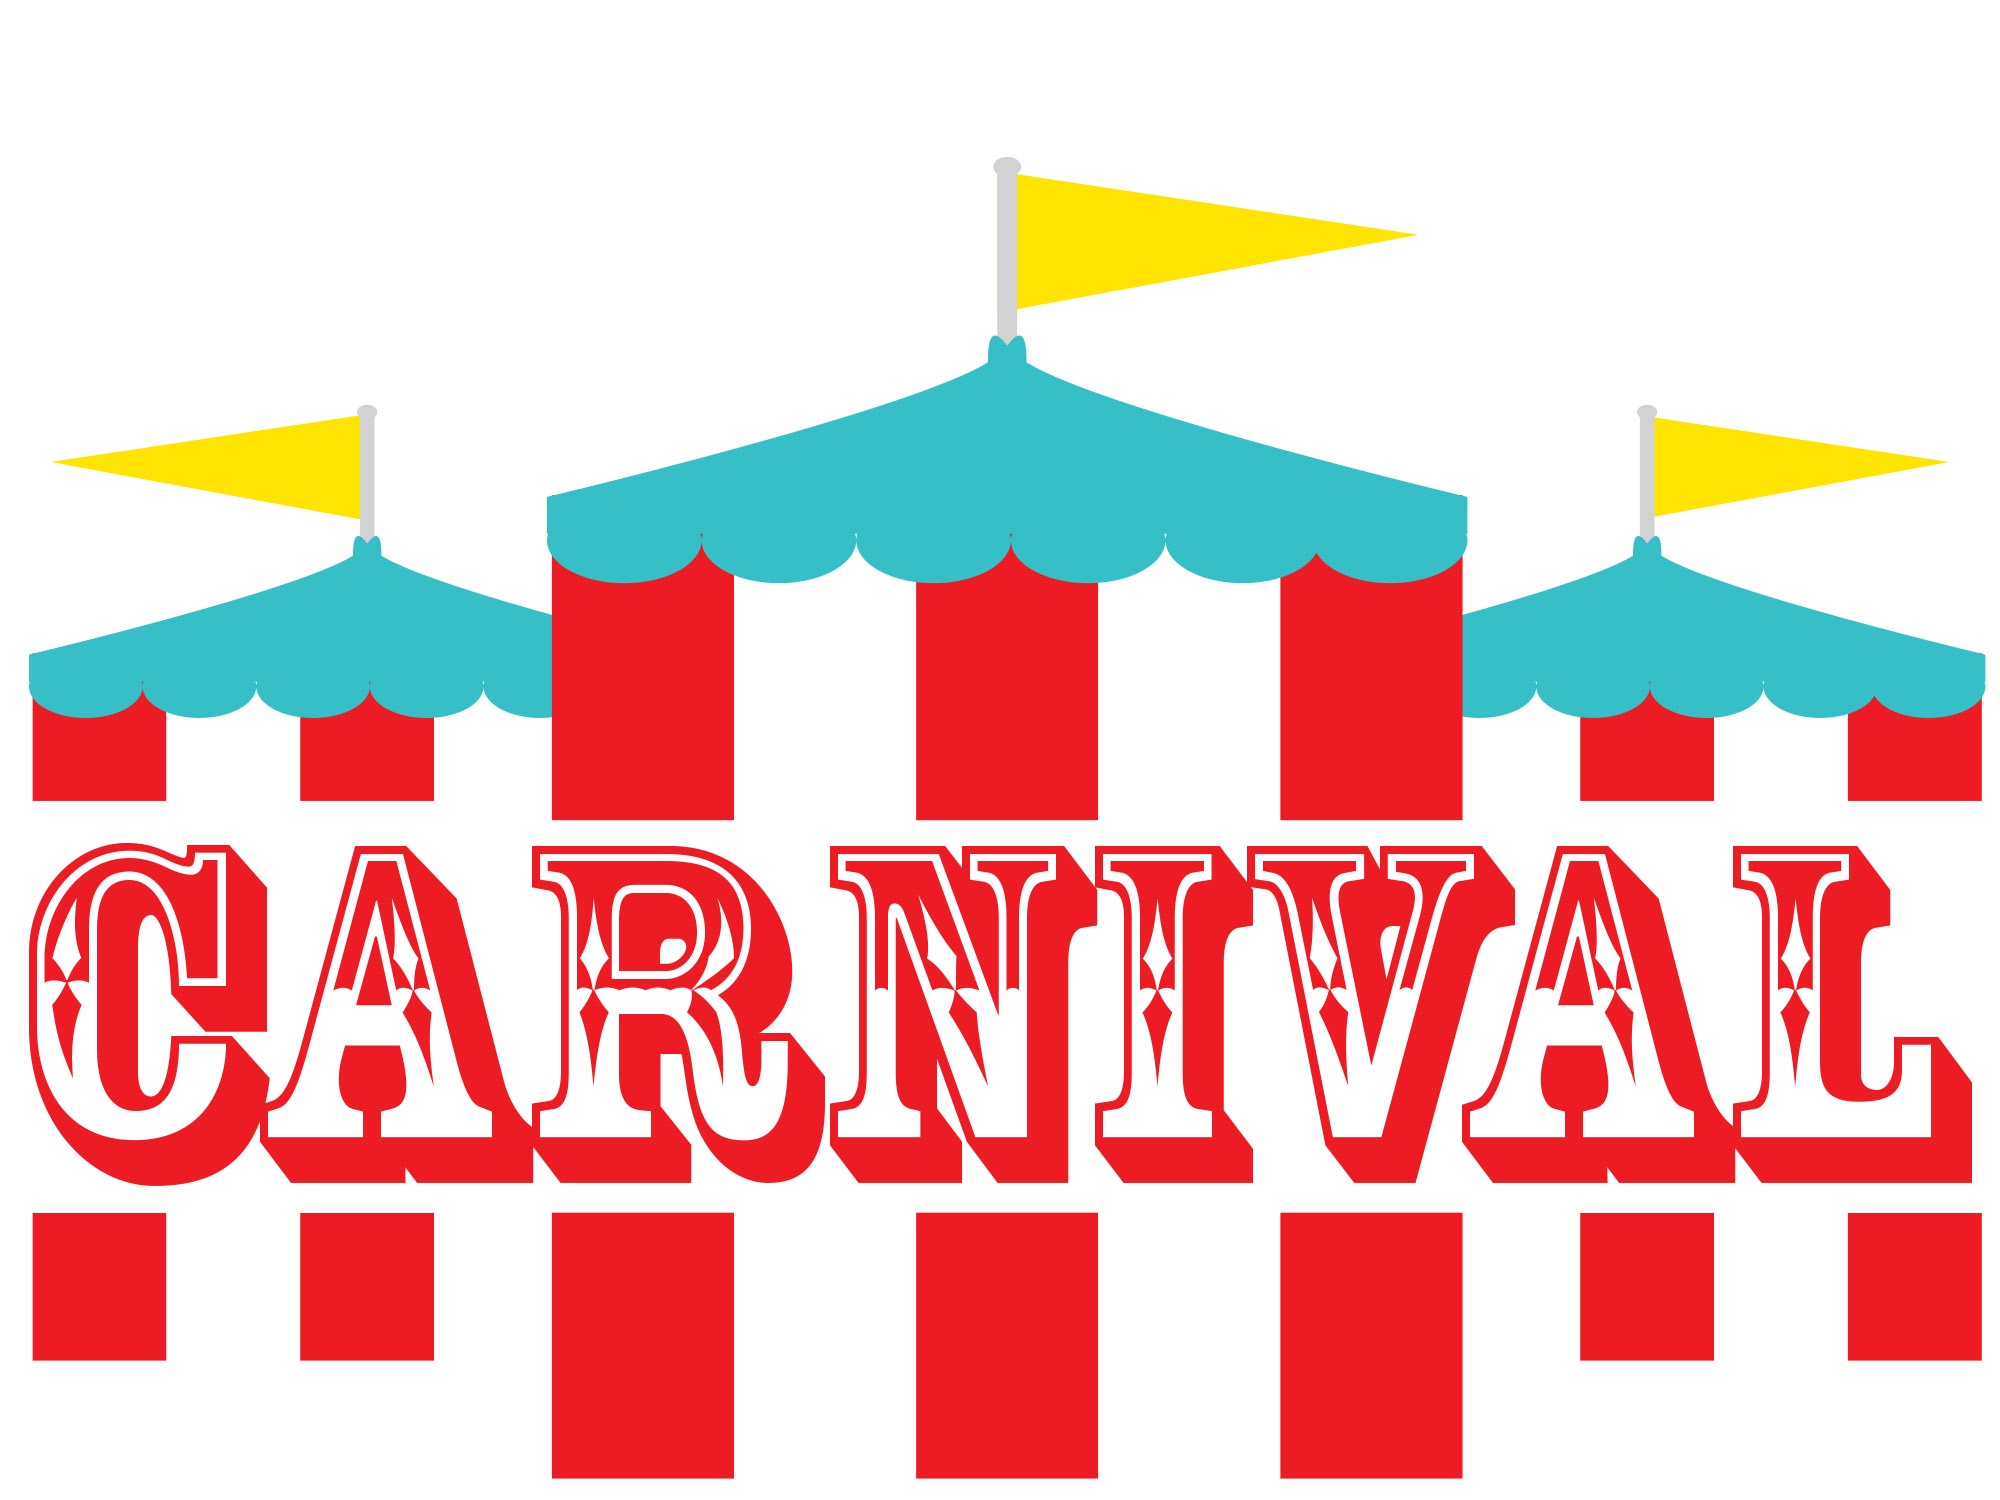 School carnival games, Fair games and Candy stores